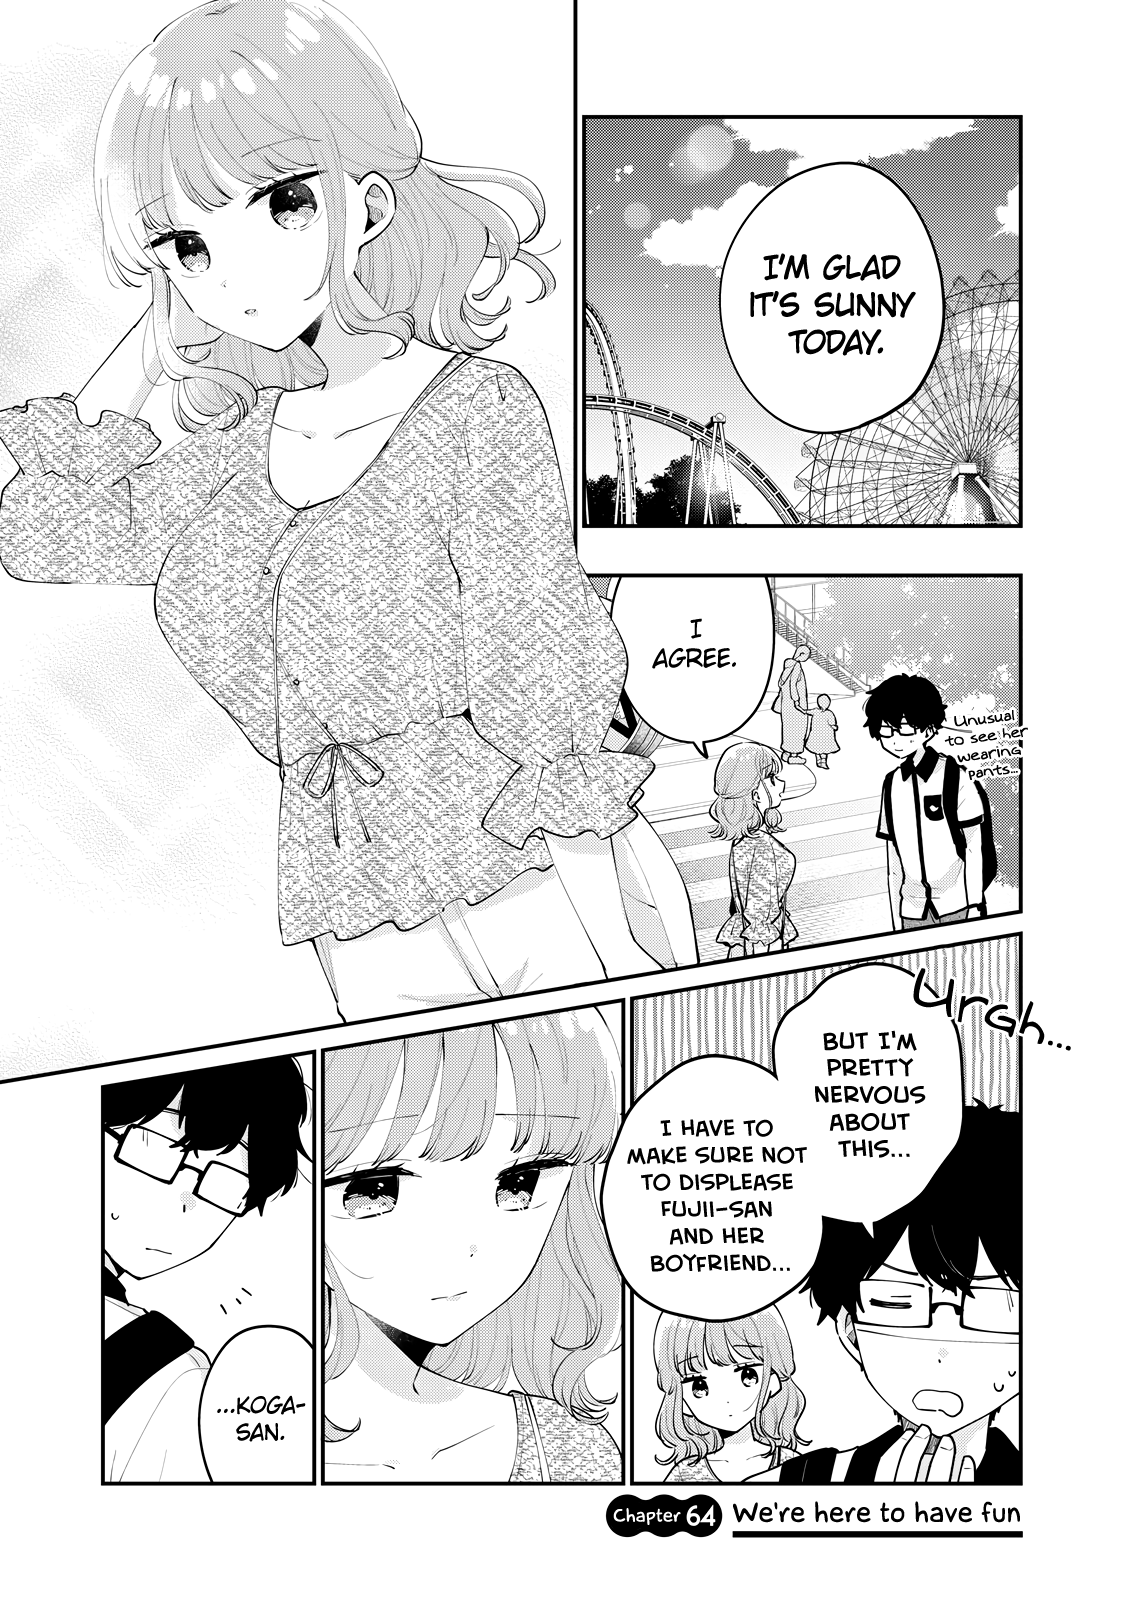 It's Not Meguro-San's First Time Vol.9 Chapter 64: We're Here To Have Fun - Picture 2